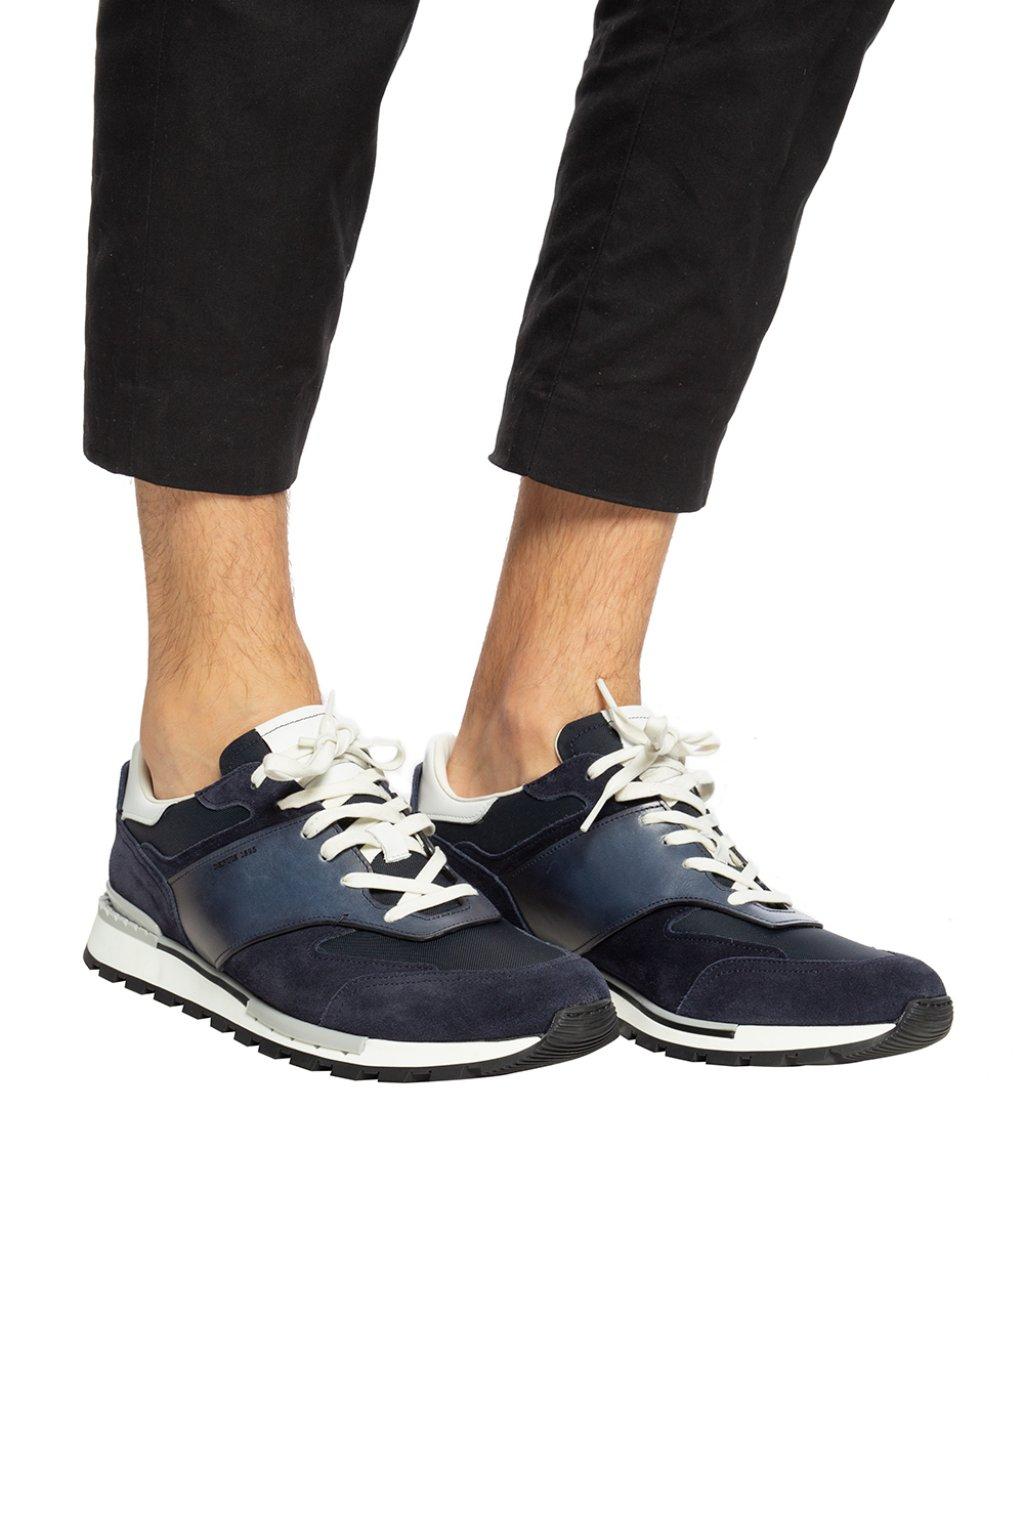 Berluti Fast Track Torino Leather Sneaker Navy Blue for Men - Save 58%